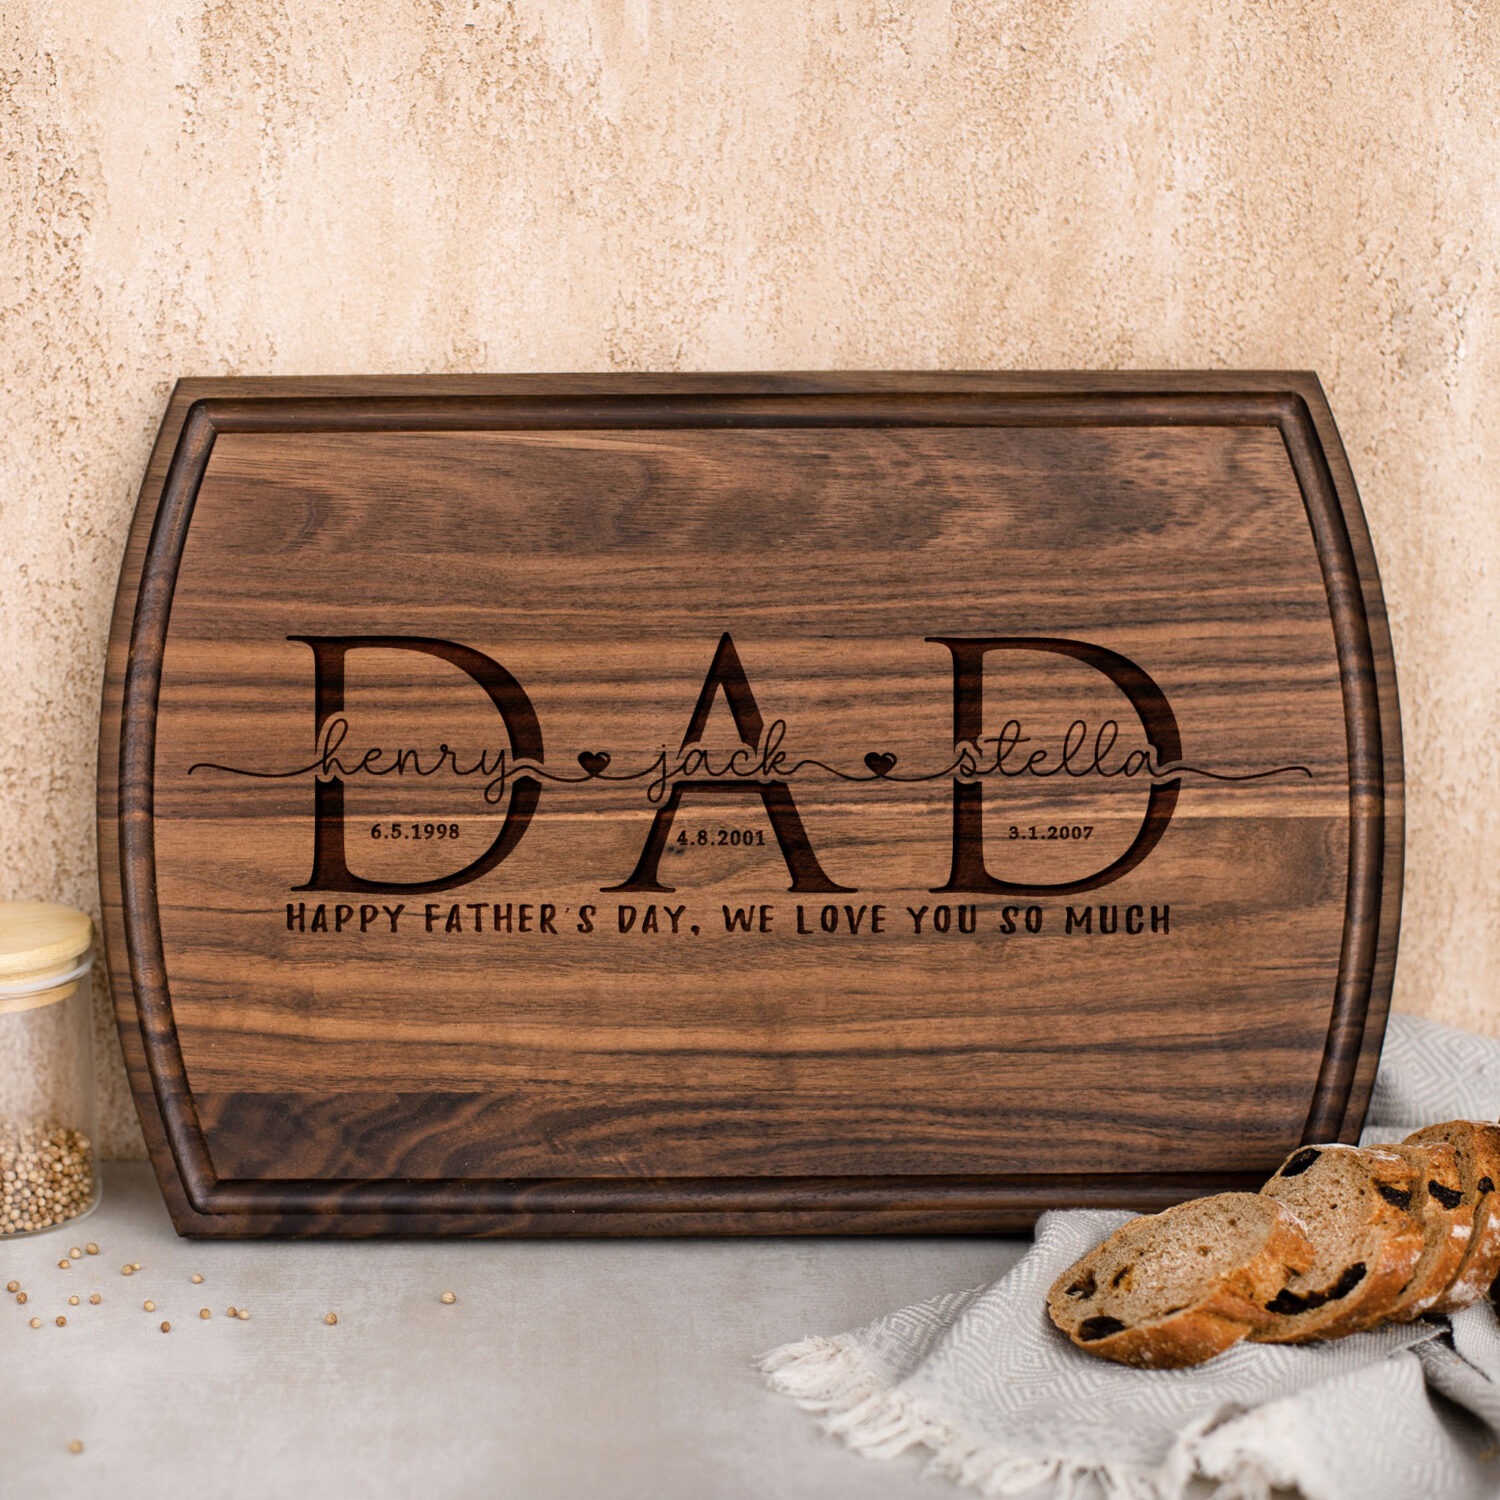 Personalized Dad Cutting Board for father's day